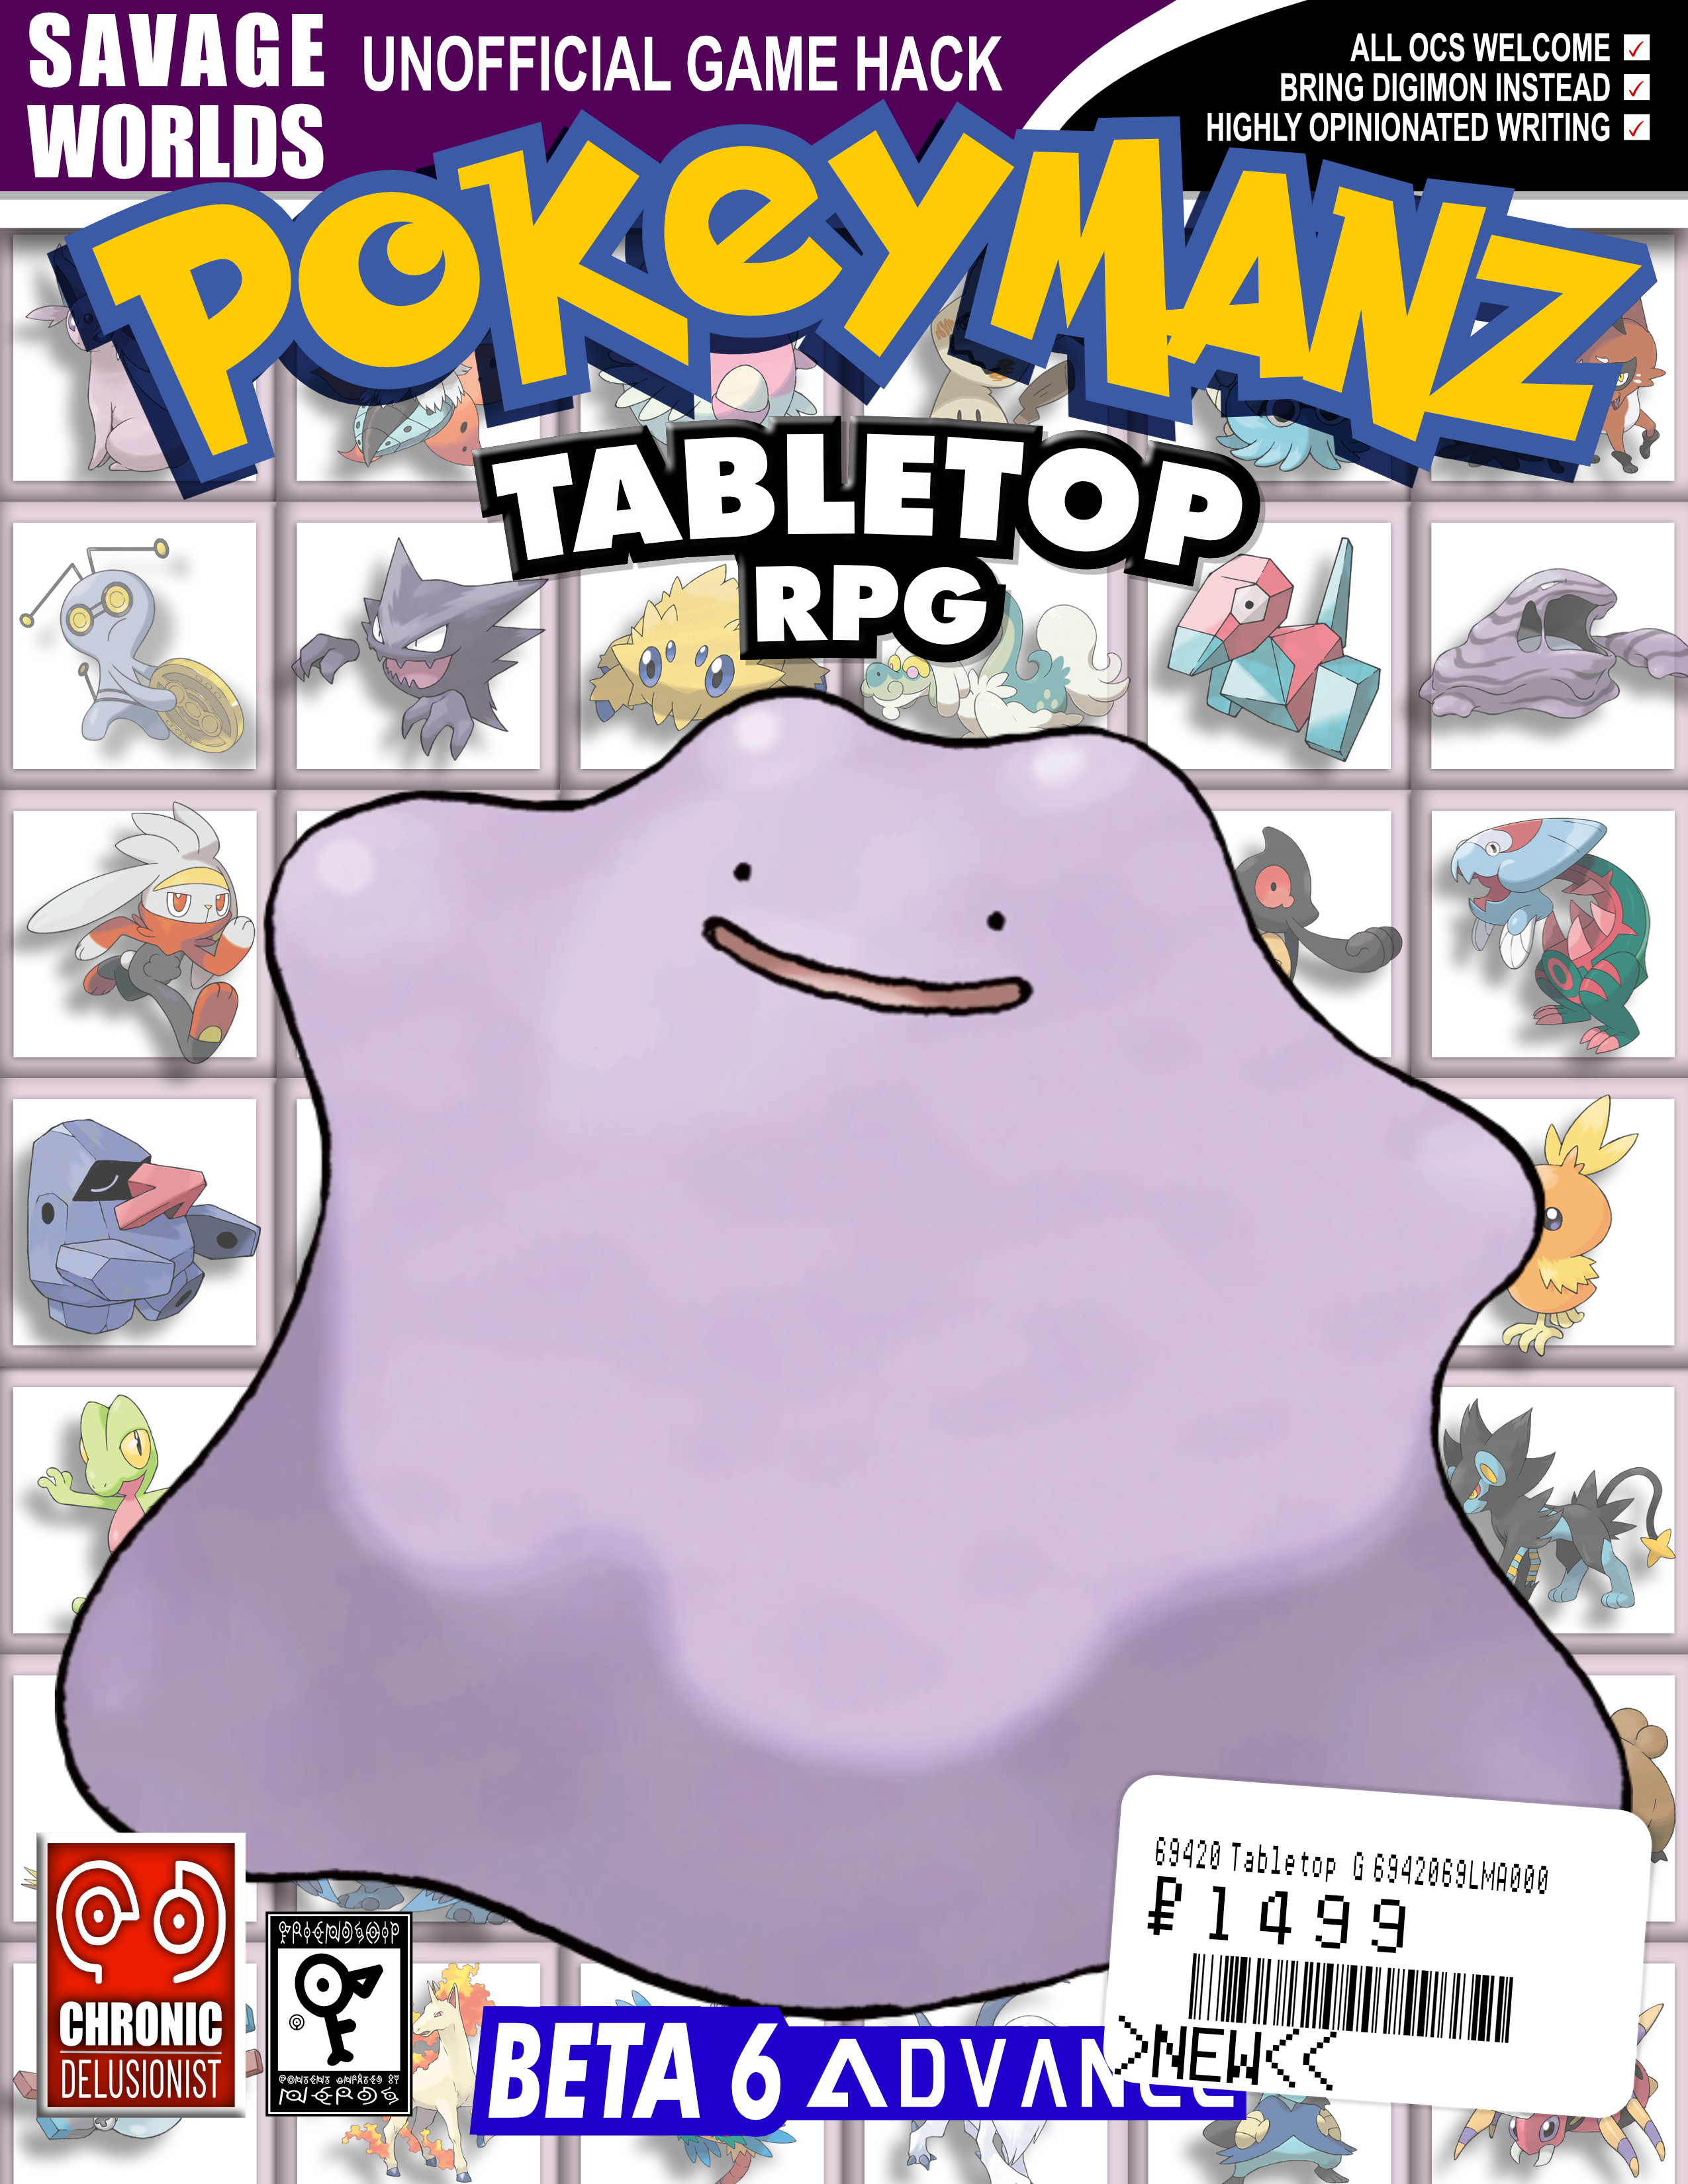 The cover image of the Pokeymanz 'book.'